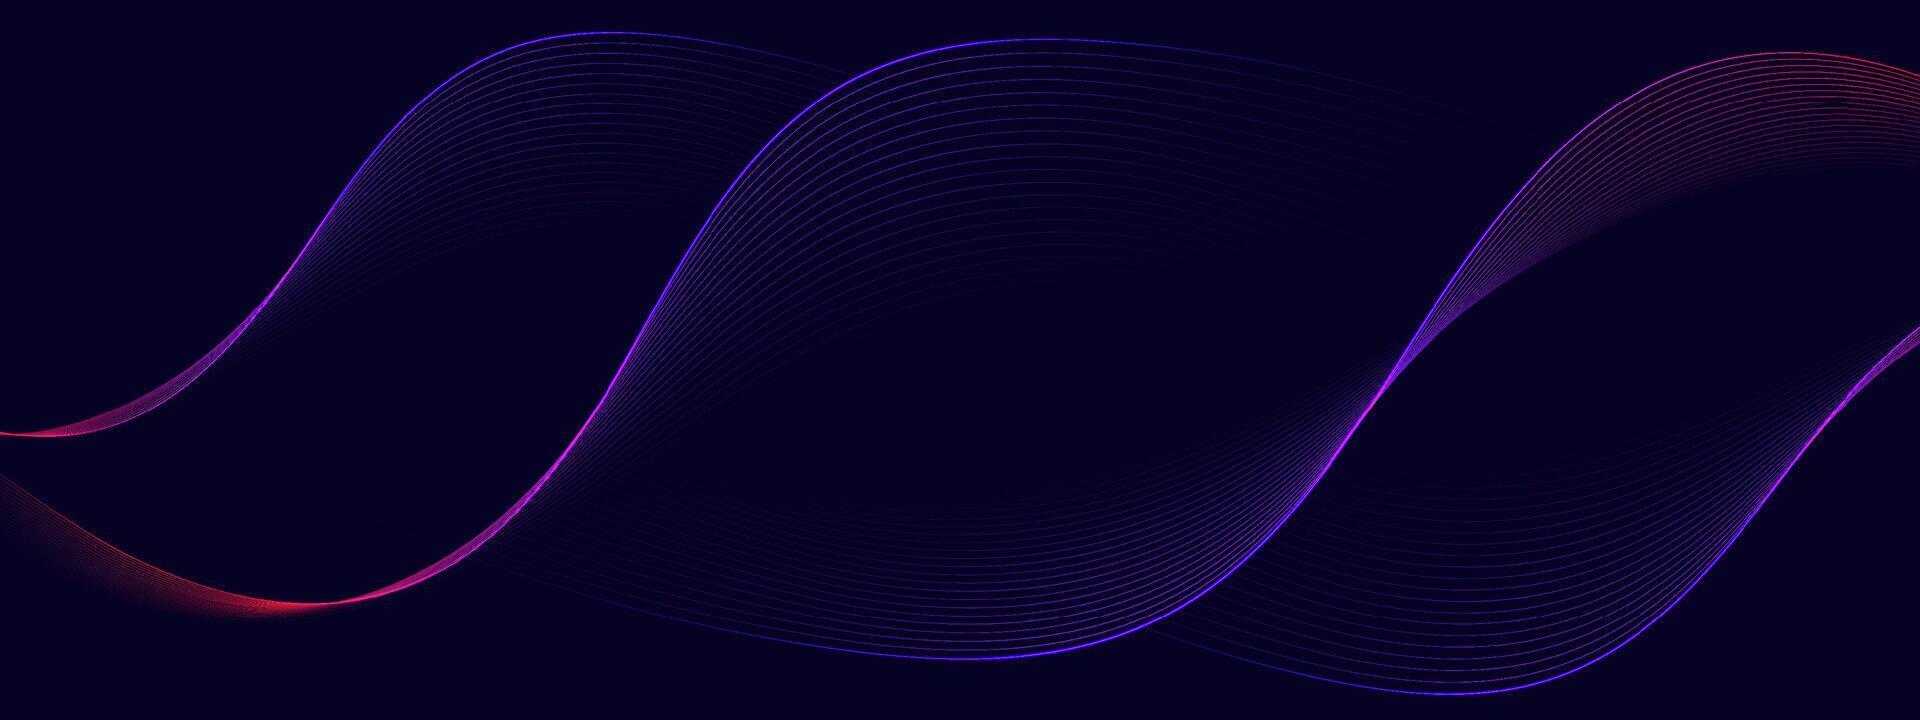 Abstract background with flowing lines. vector